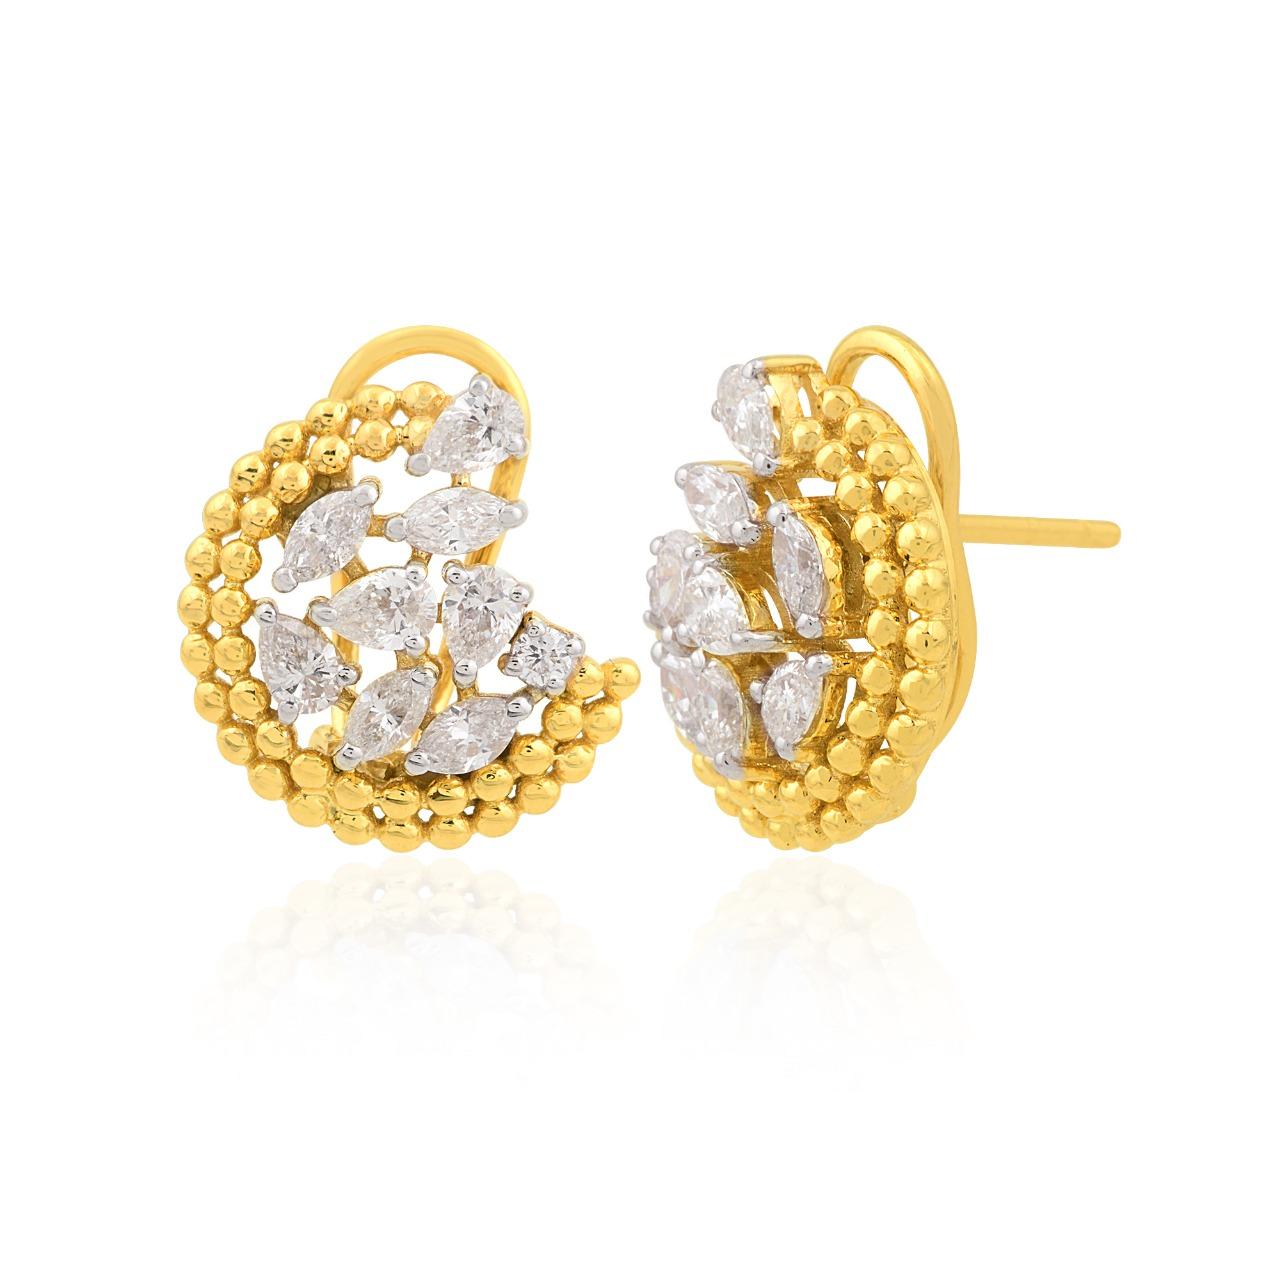 Cast from 14-karat gold, these beautiful earrings are hand set with 2.60 carats of sparkling diamonds. 

FOLLOW MEGHNA JEWELS storefront to view the latest collection & exclusive pieces. Meghna Jewels is proudly rated as a Top Seller on 1stdibs with